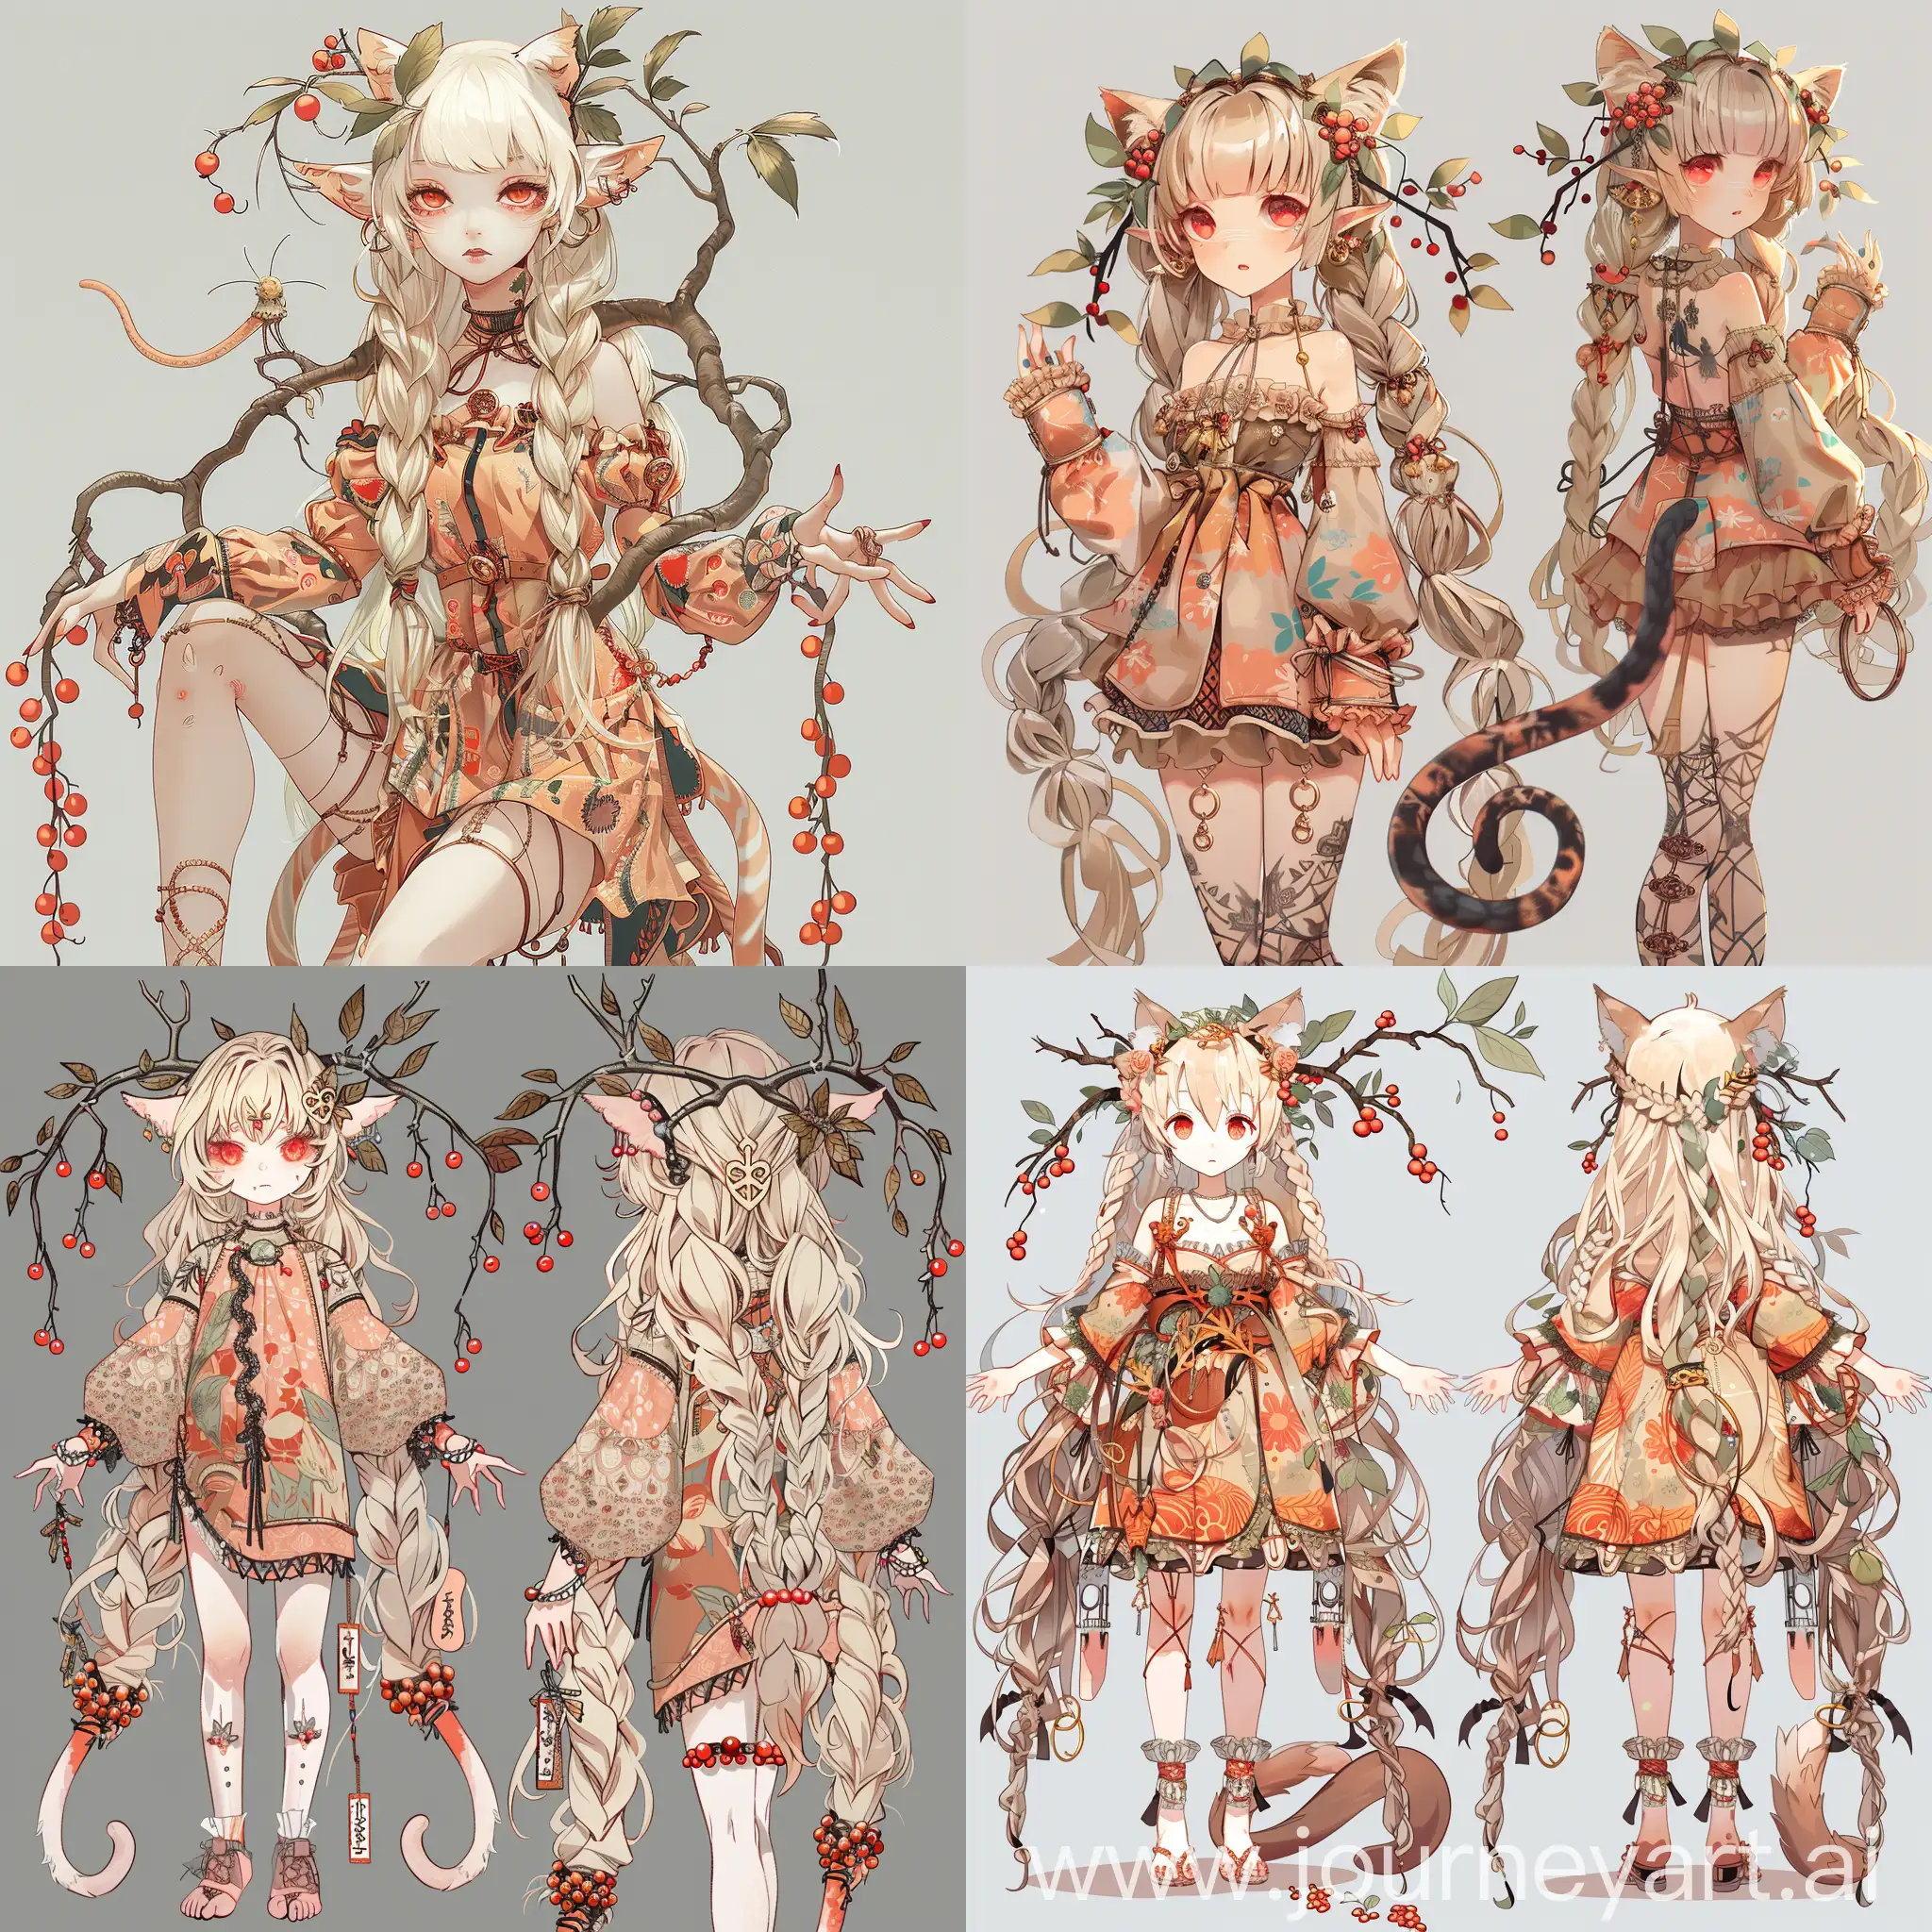 anime girl, long wavy blonde hair, thick braids, branches with leaves from the head, red eyes, albino, a lot of fabrics on clothes, peach patterns on clothes, rowan berries on the ears and hands, legs-paws, cat tail with rings, Multiple views